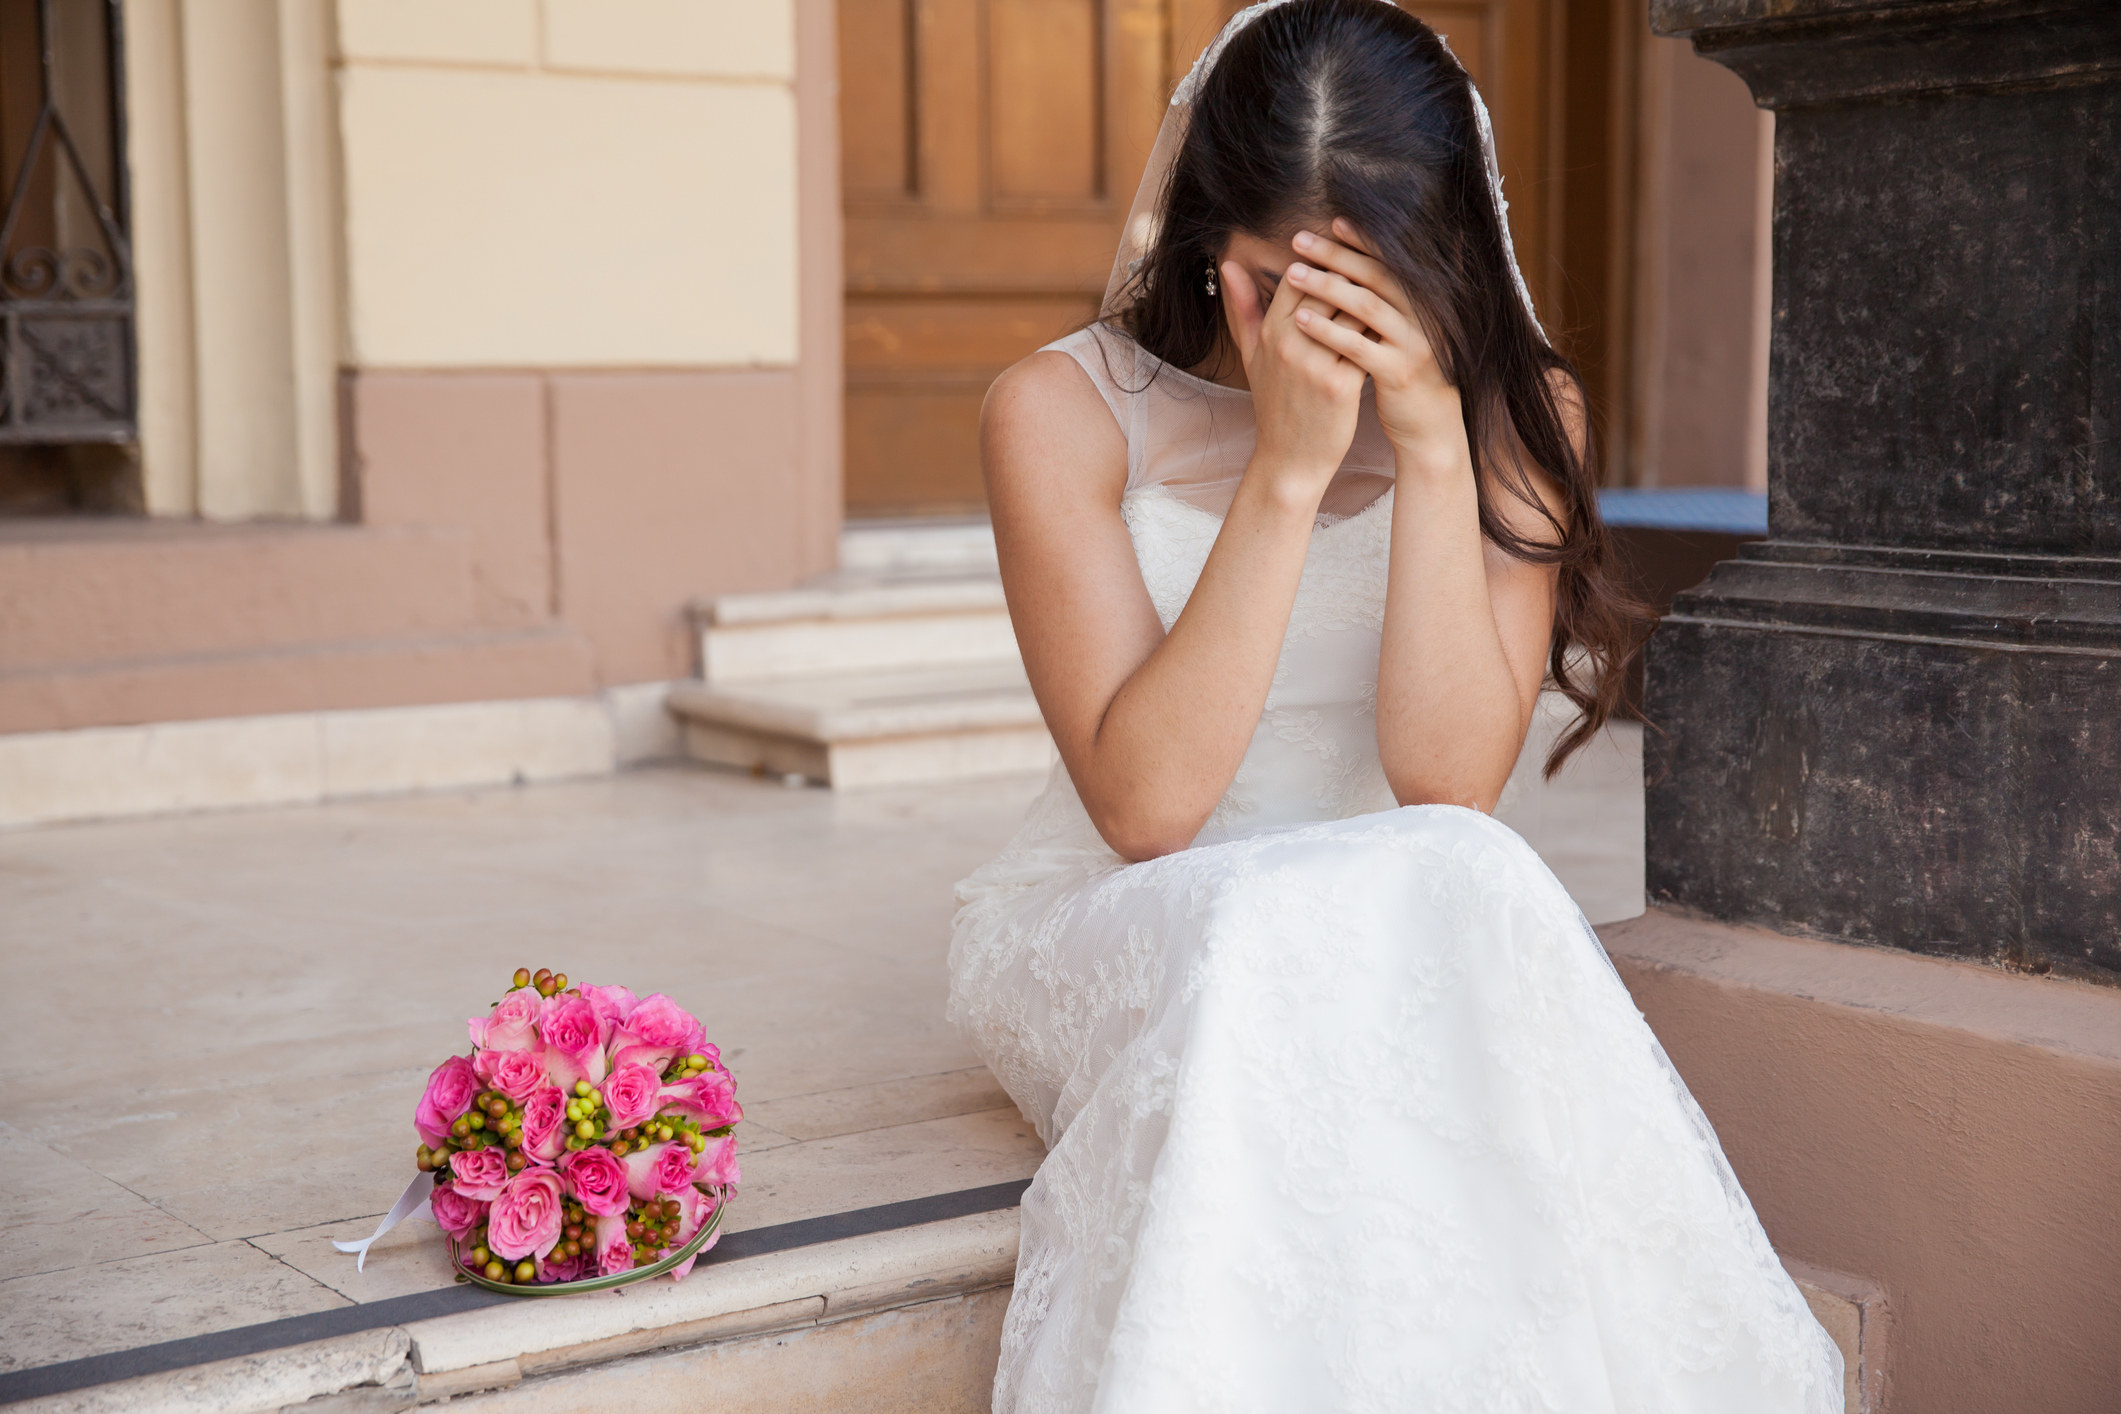 A bride hiding her face with her hands